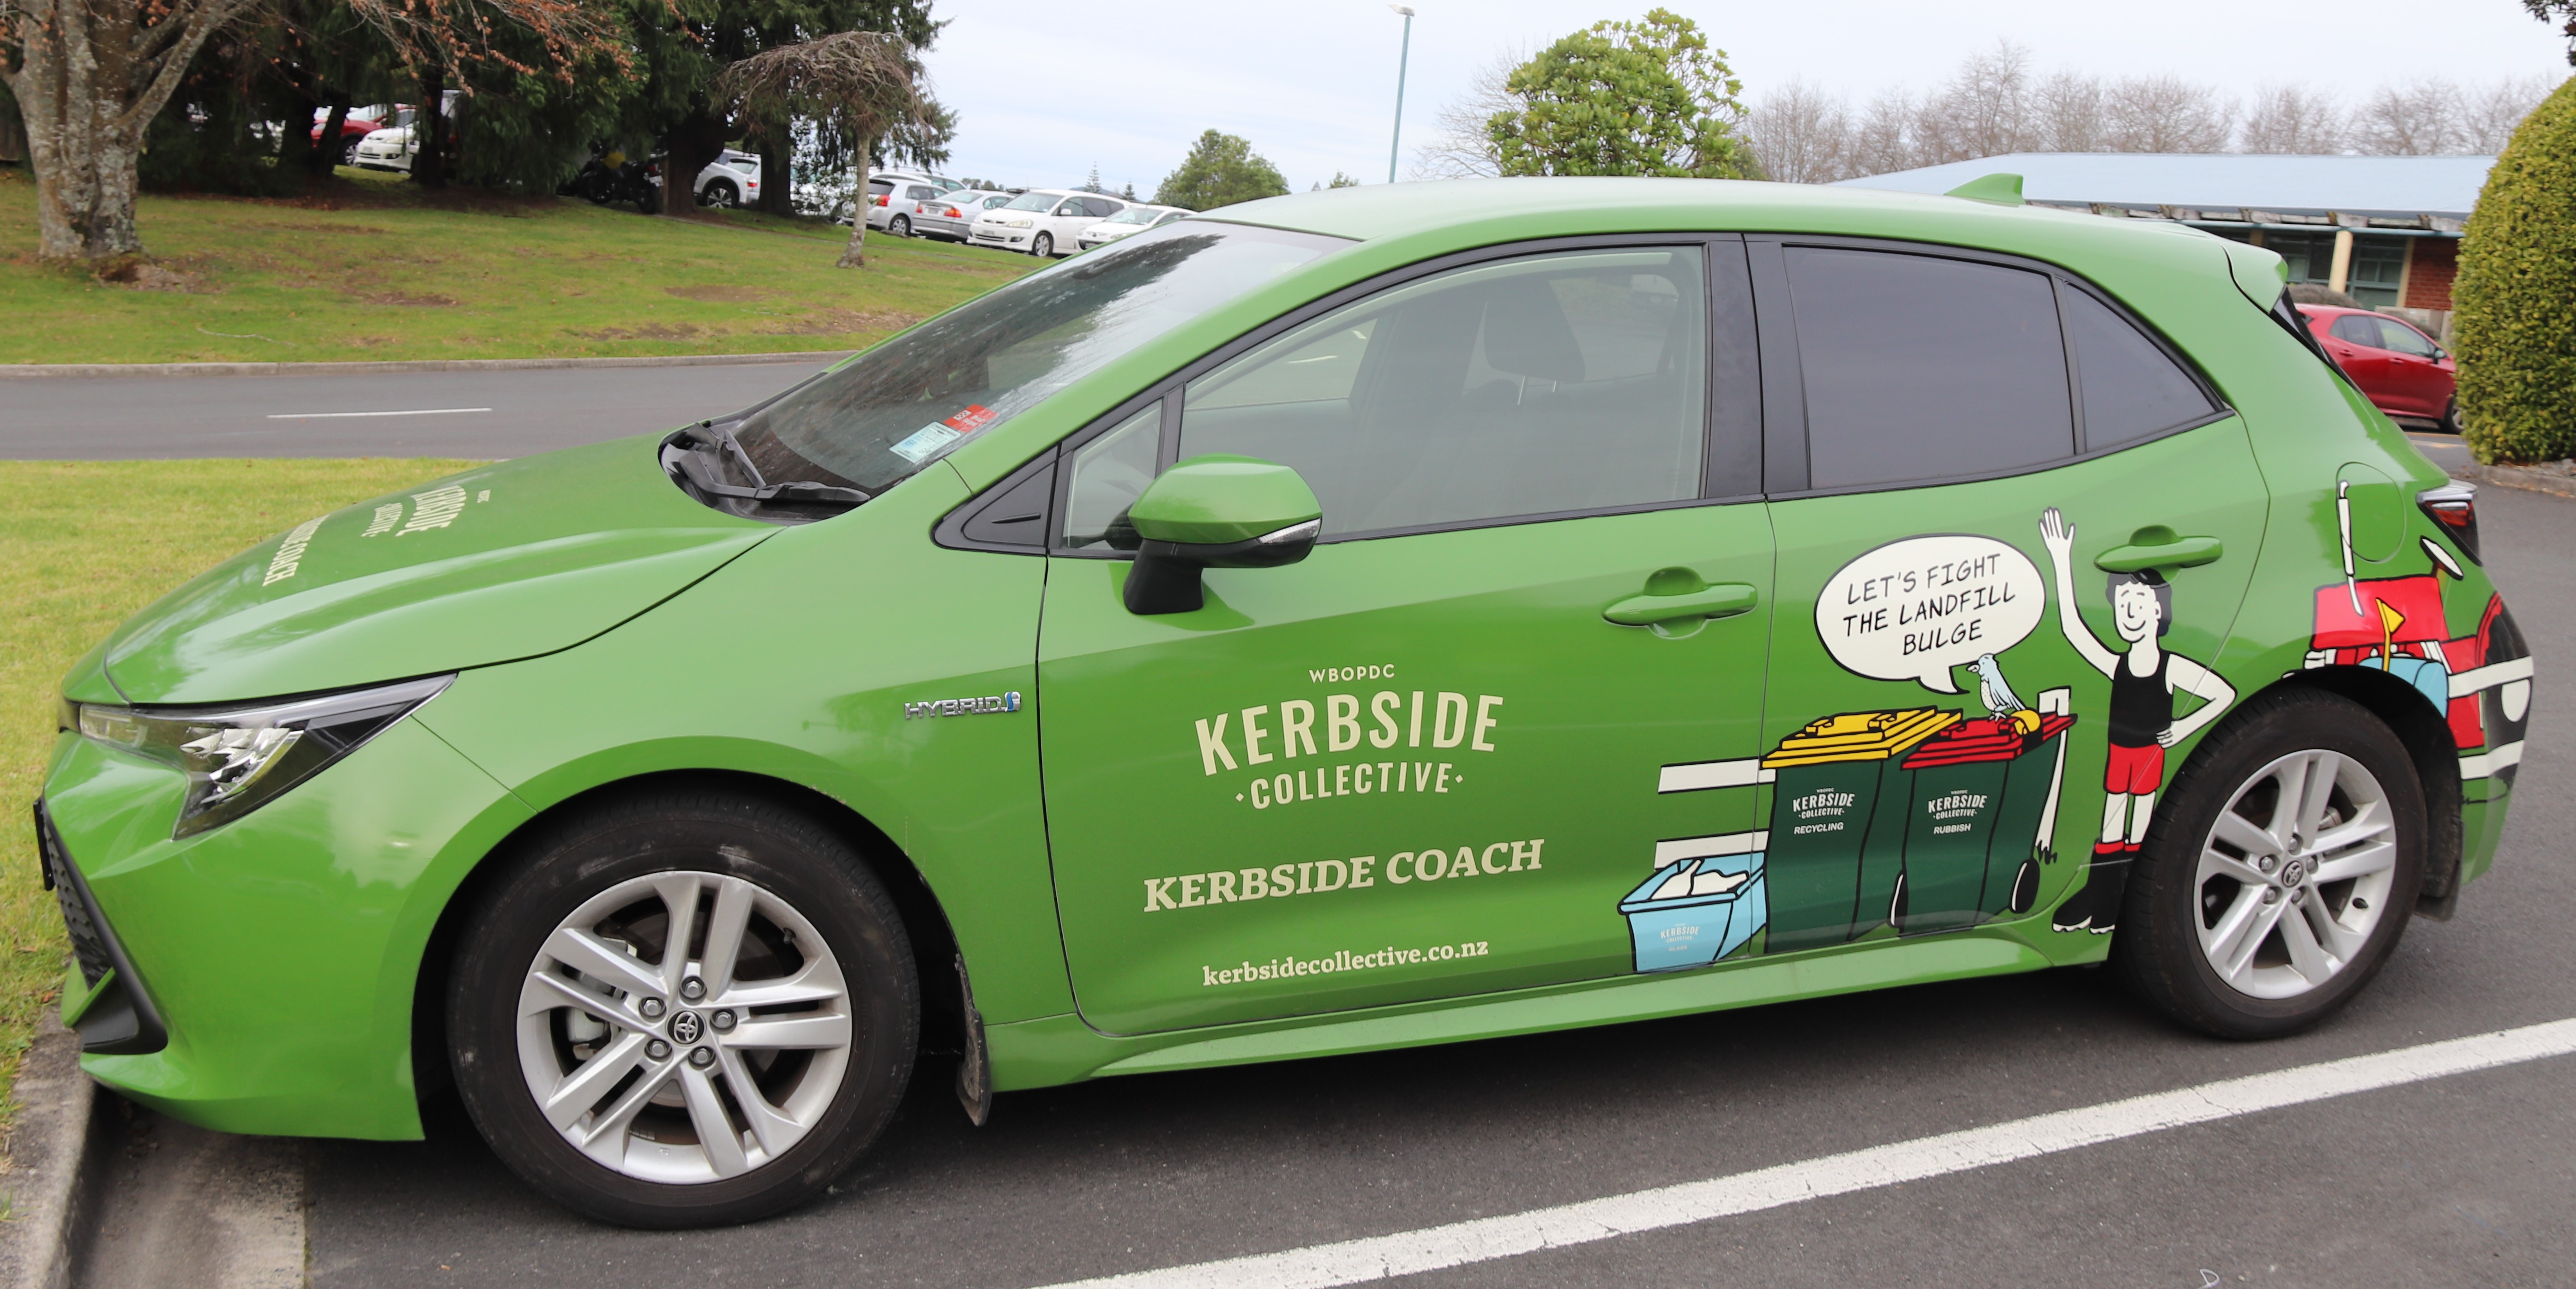 Council's Kerbside Coach, part of the education programme to ensure residents recycle right.